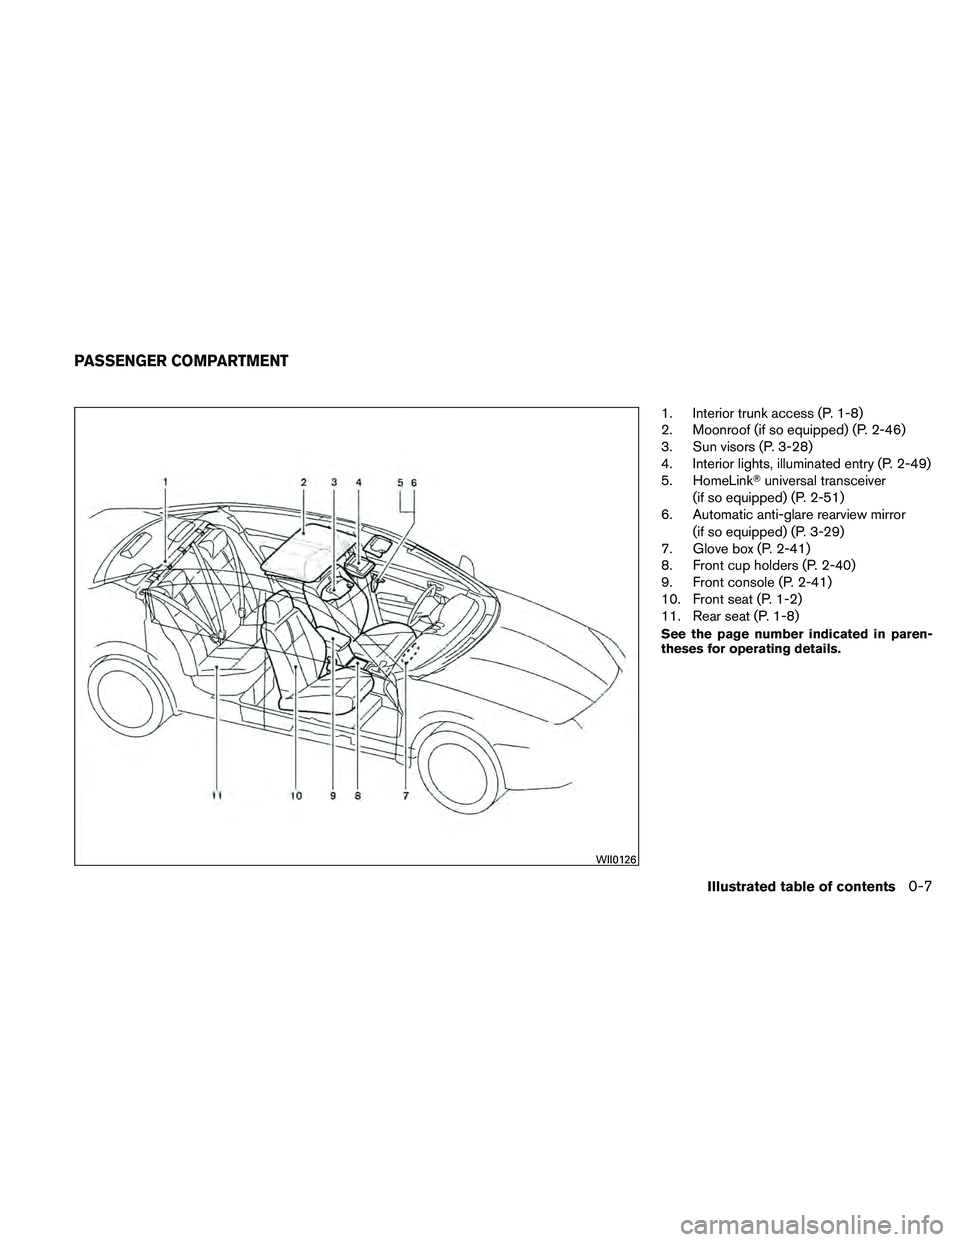 NISSAN ALTIMA 2011  Owners Manual 1. Interior trunk access (P. 1-8)
2. Moonroof (if so equipped) (P. 2-46)
3. Sun visors (P. 3-28)
4. Interior lights, illuminated entry (P. 2-49)
5. HomeLinkuniversal transceiver
(if so equipped) (P. 